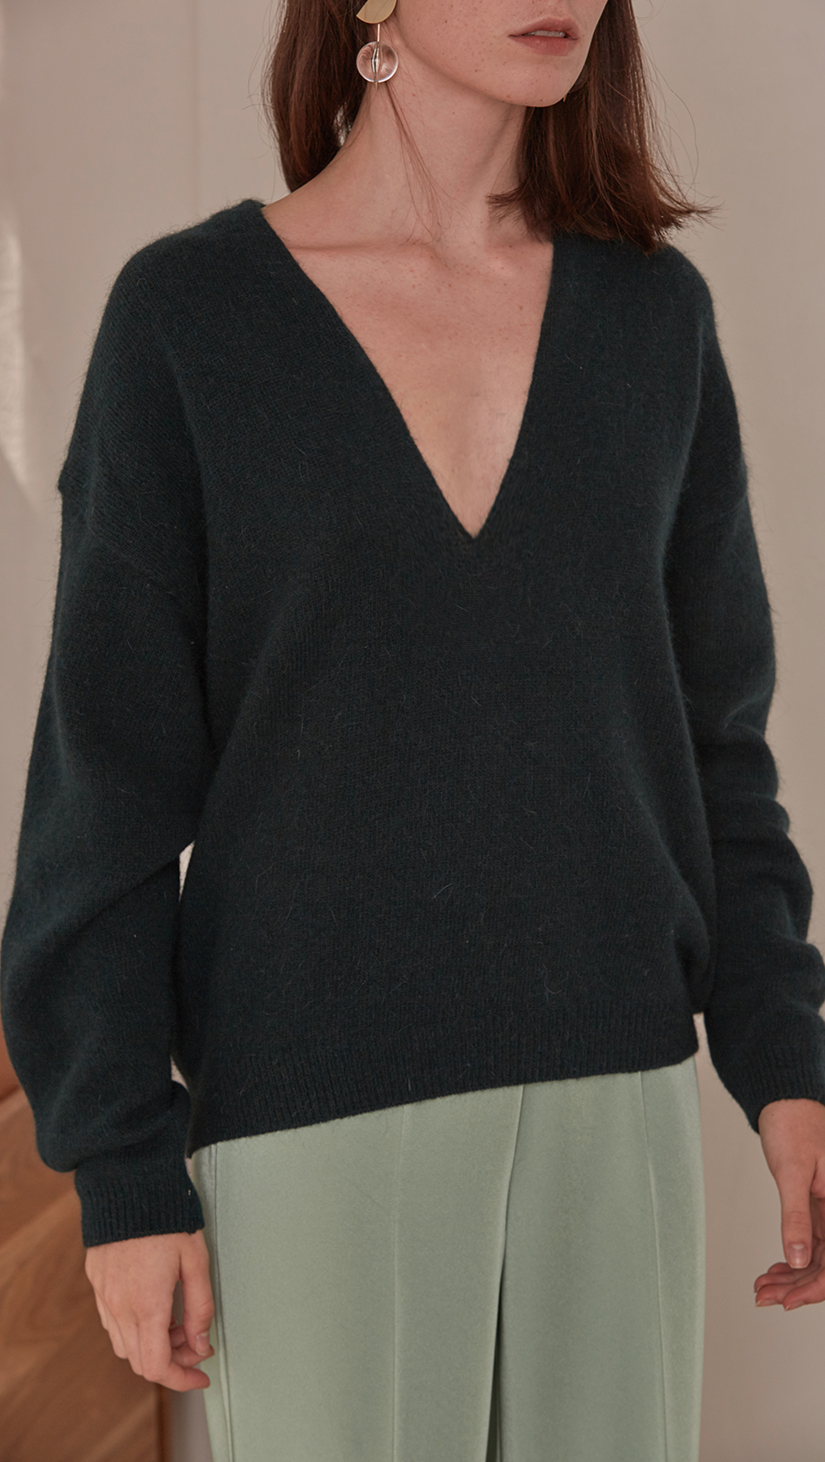 Agostina Sweater in Dark Green. Long sleeved pullover with deep v-neck in dark green lambs wool blend. Cowl neck ribbed sweater with pointed dropped shoulder seams and extra long sleeves. Designed to be loose fit.